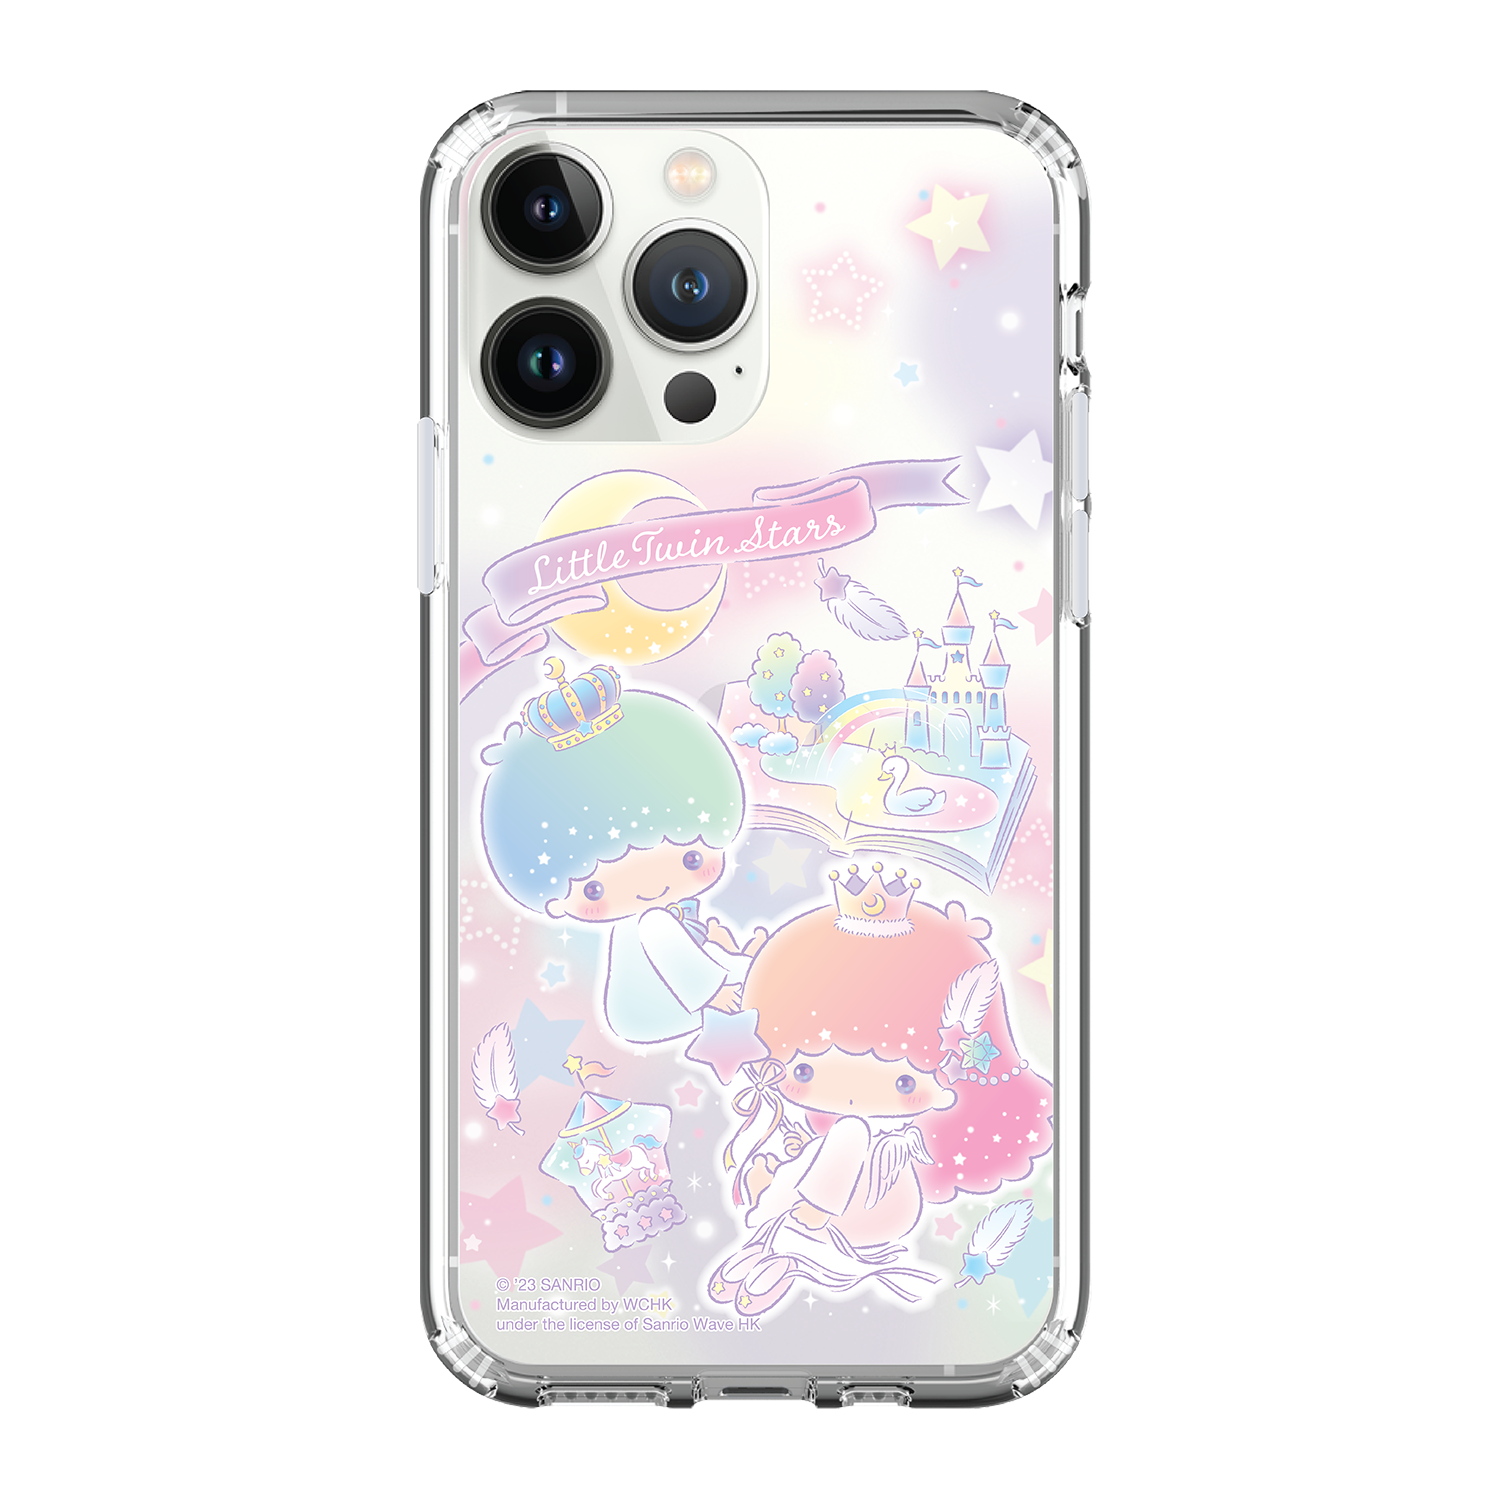 Little Twin Stars Clear Case / iPhone Case / Android Case / Samsung Case 防撞透明手機殼 (TS147)